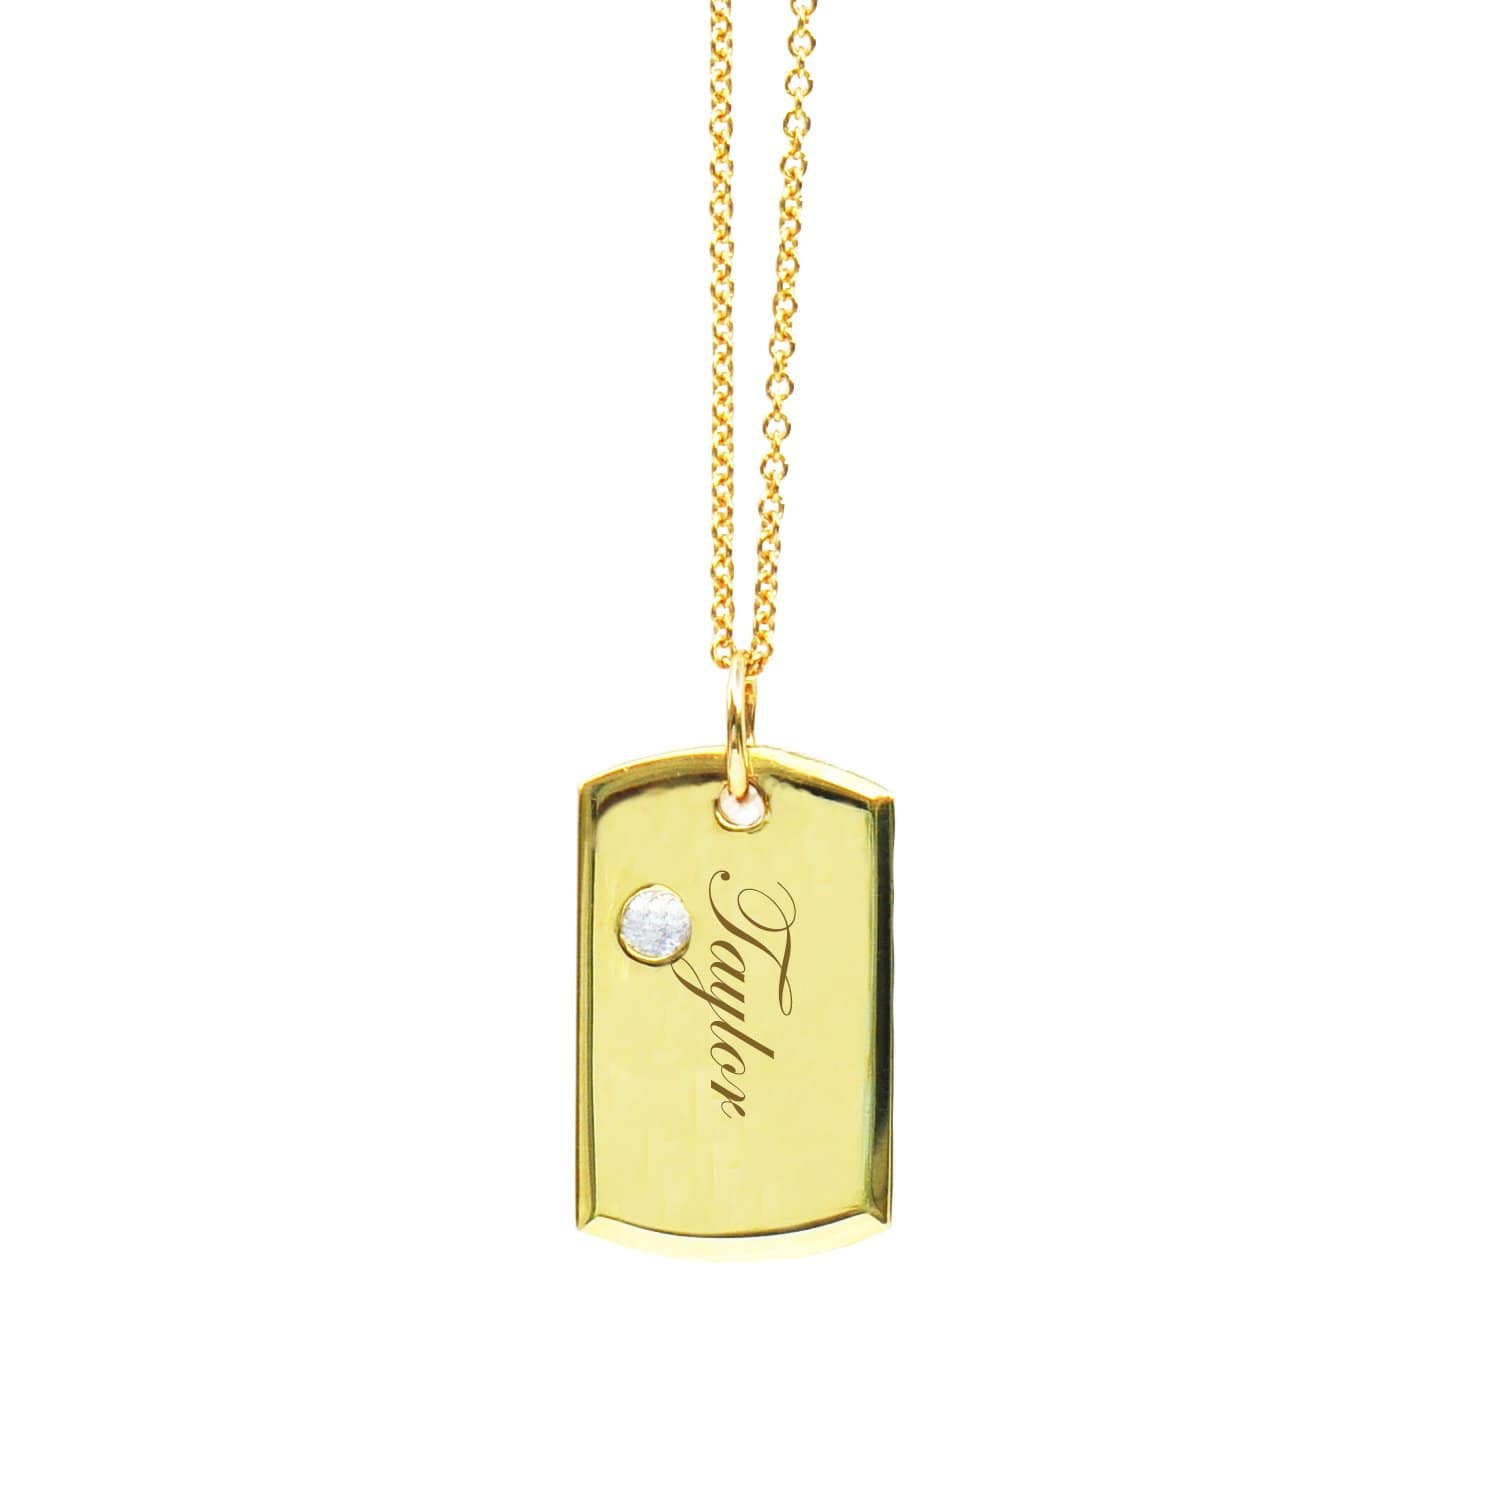 18K BABY DOG TAG WITH SOLITAIRE DIAMOND - Chris Aire Fine Jewelry & Timepieces